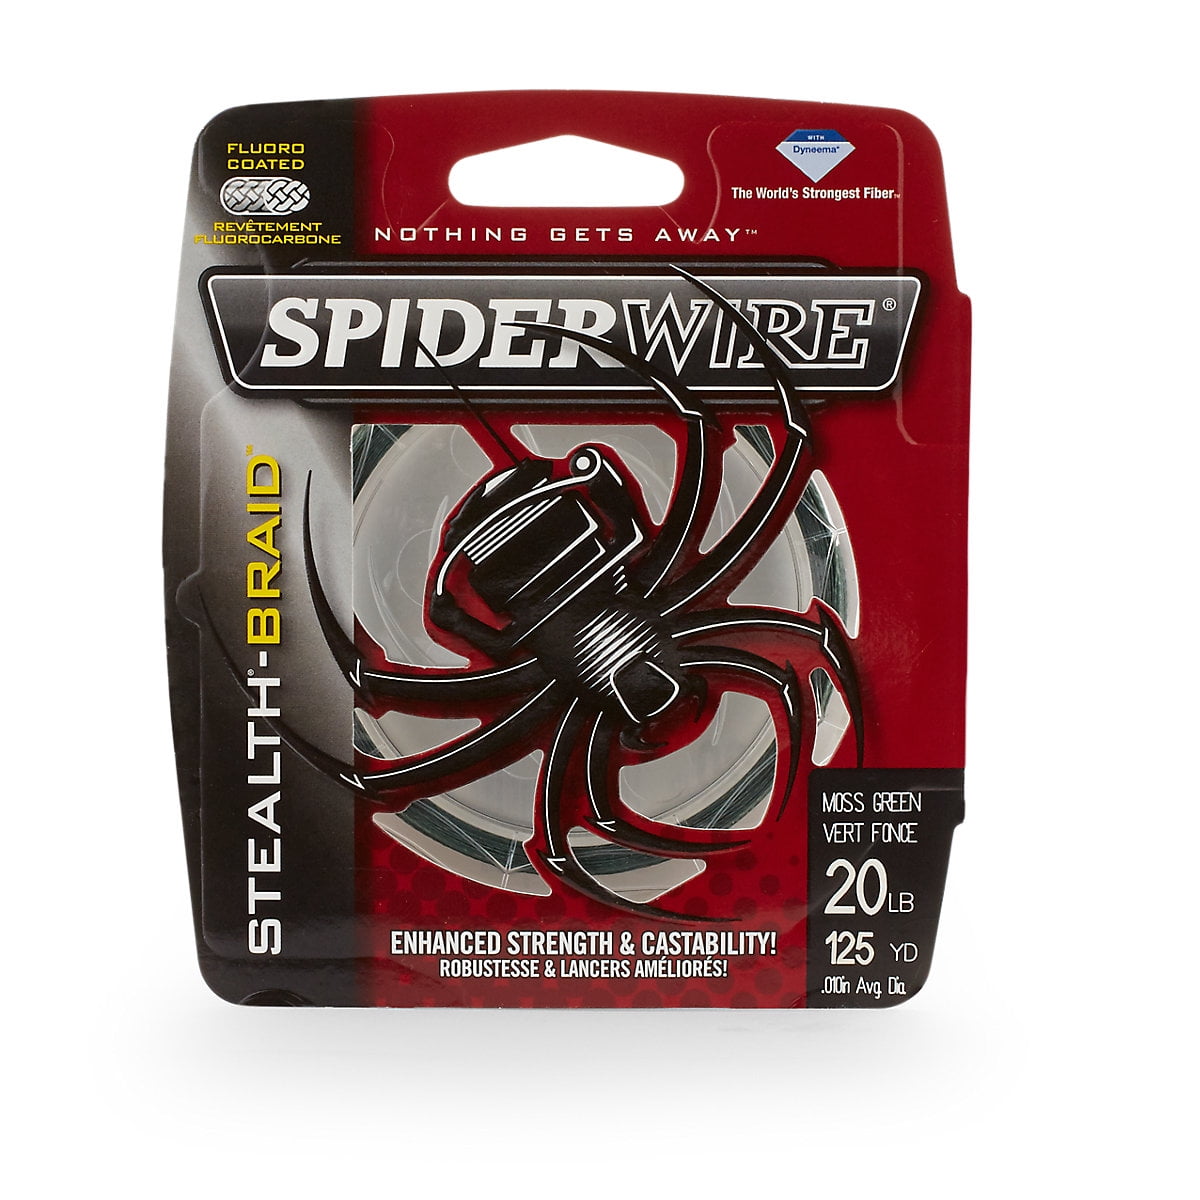 SpiderWire Stealth® Superline, Moss Green, 20lb | 9kg Fishing Line